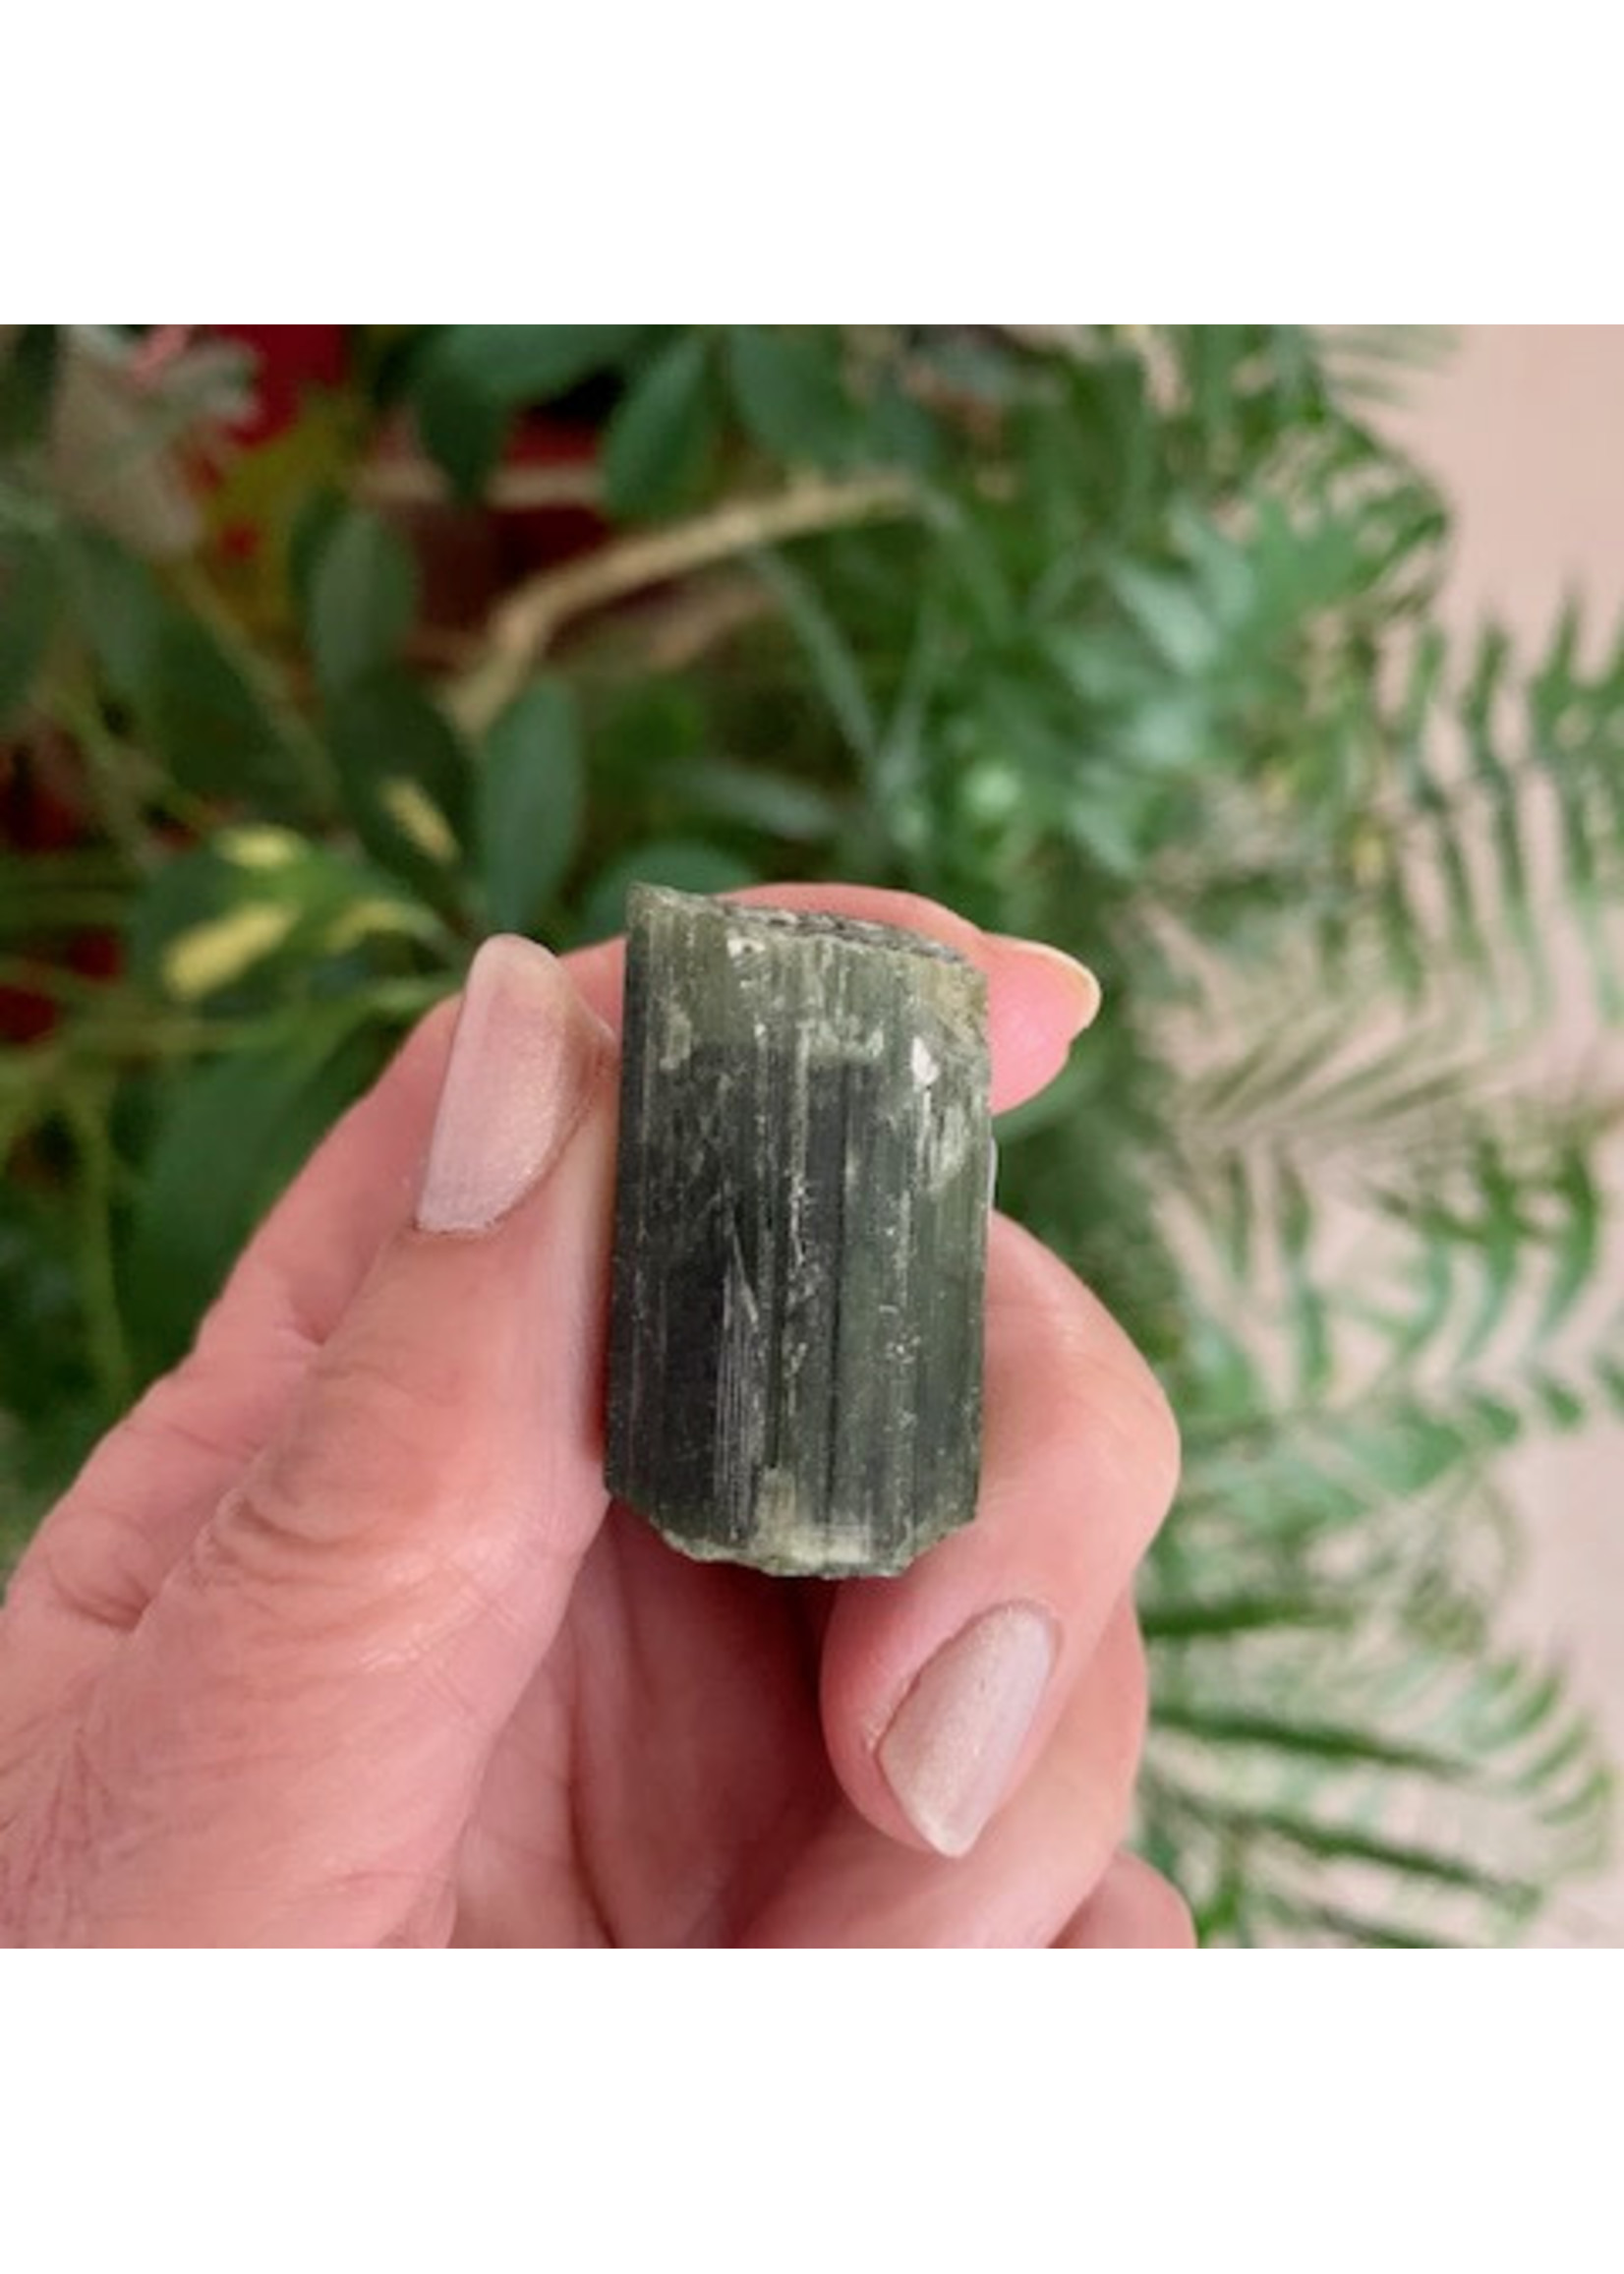 Green Tourmaline for joy and compassion